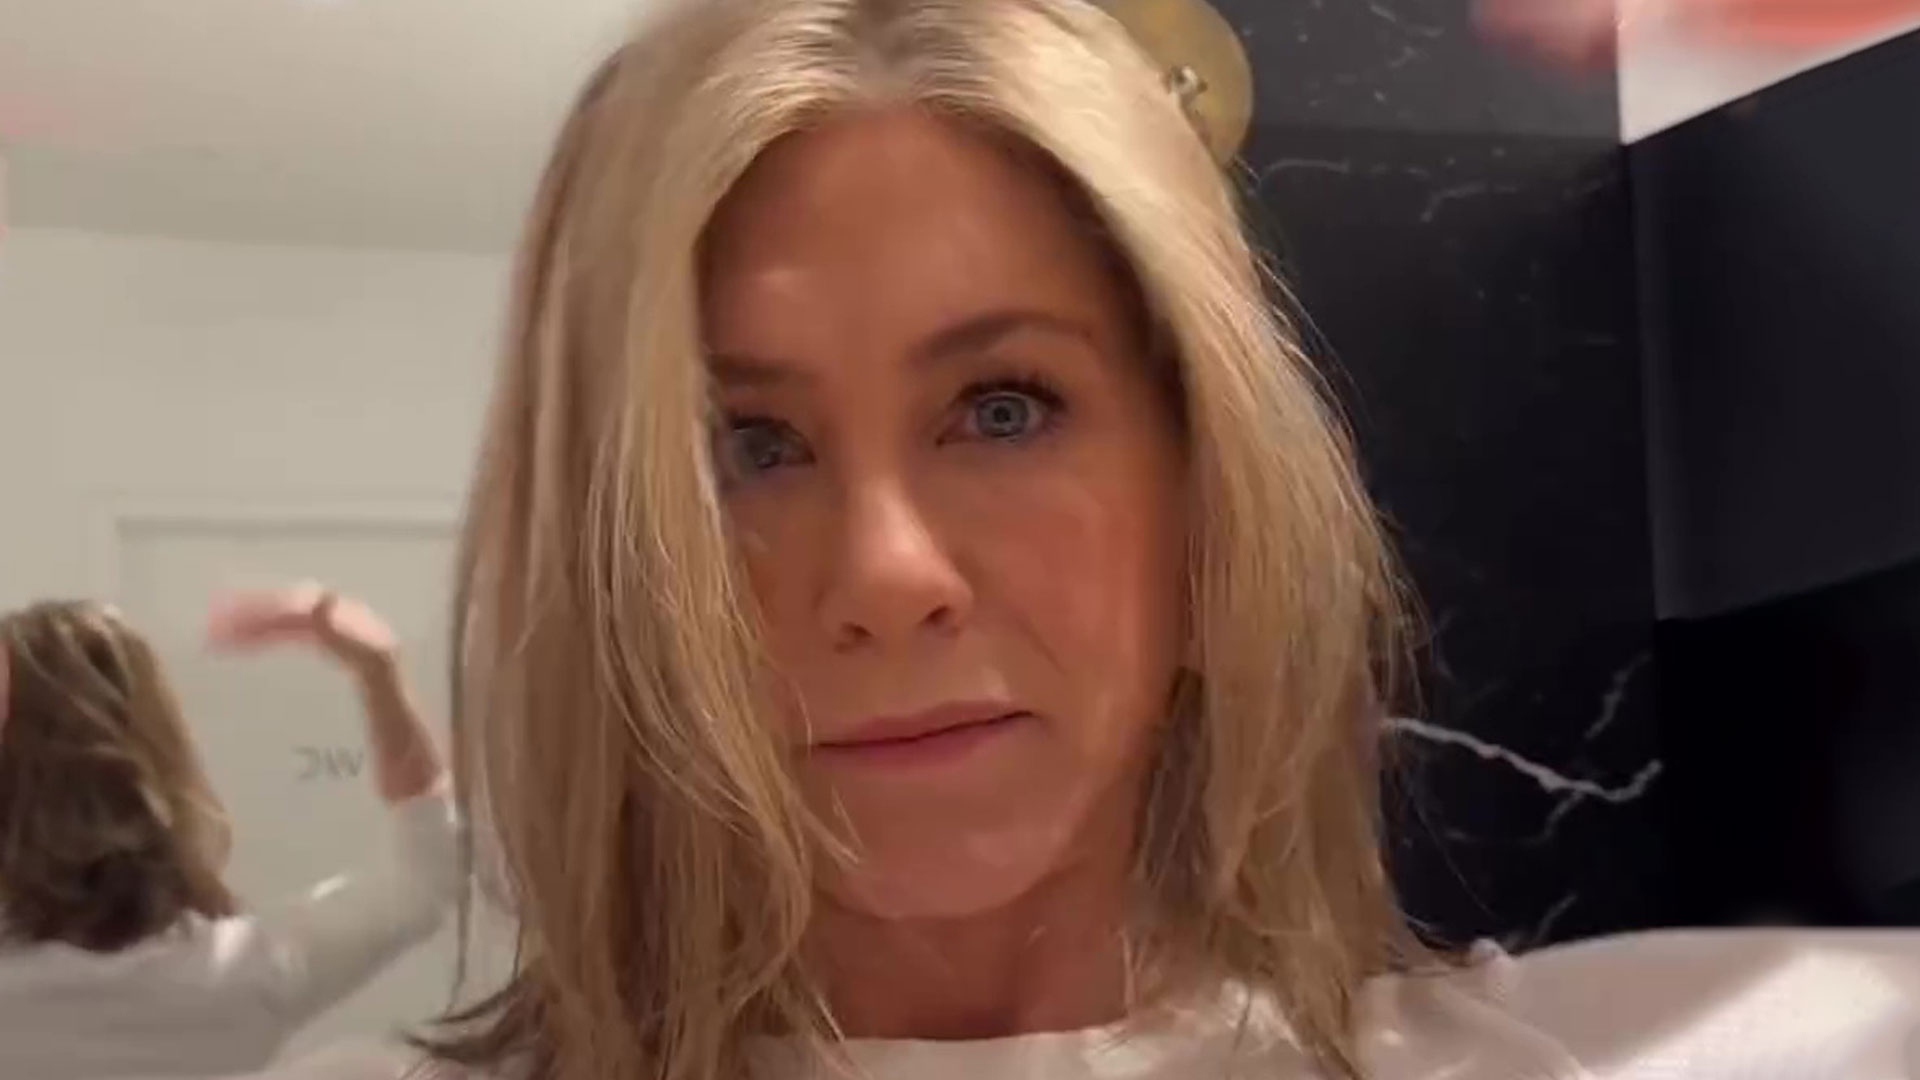 Jennifer Aniston puts on very perky display in a white top for new ad as fans joke ‘I can only concentrate on one thing’ [Video]